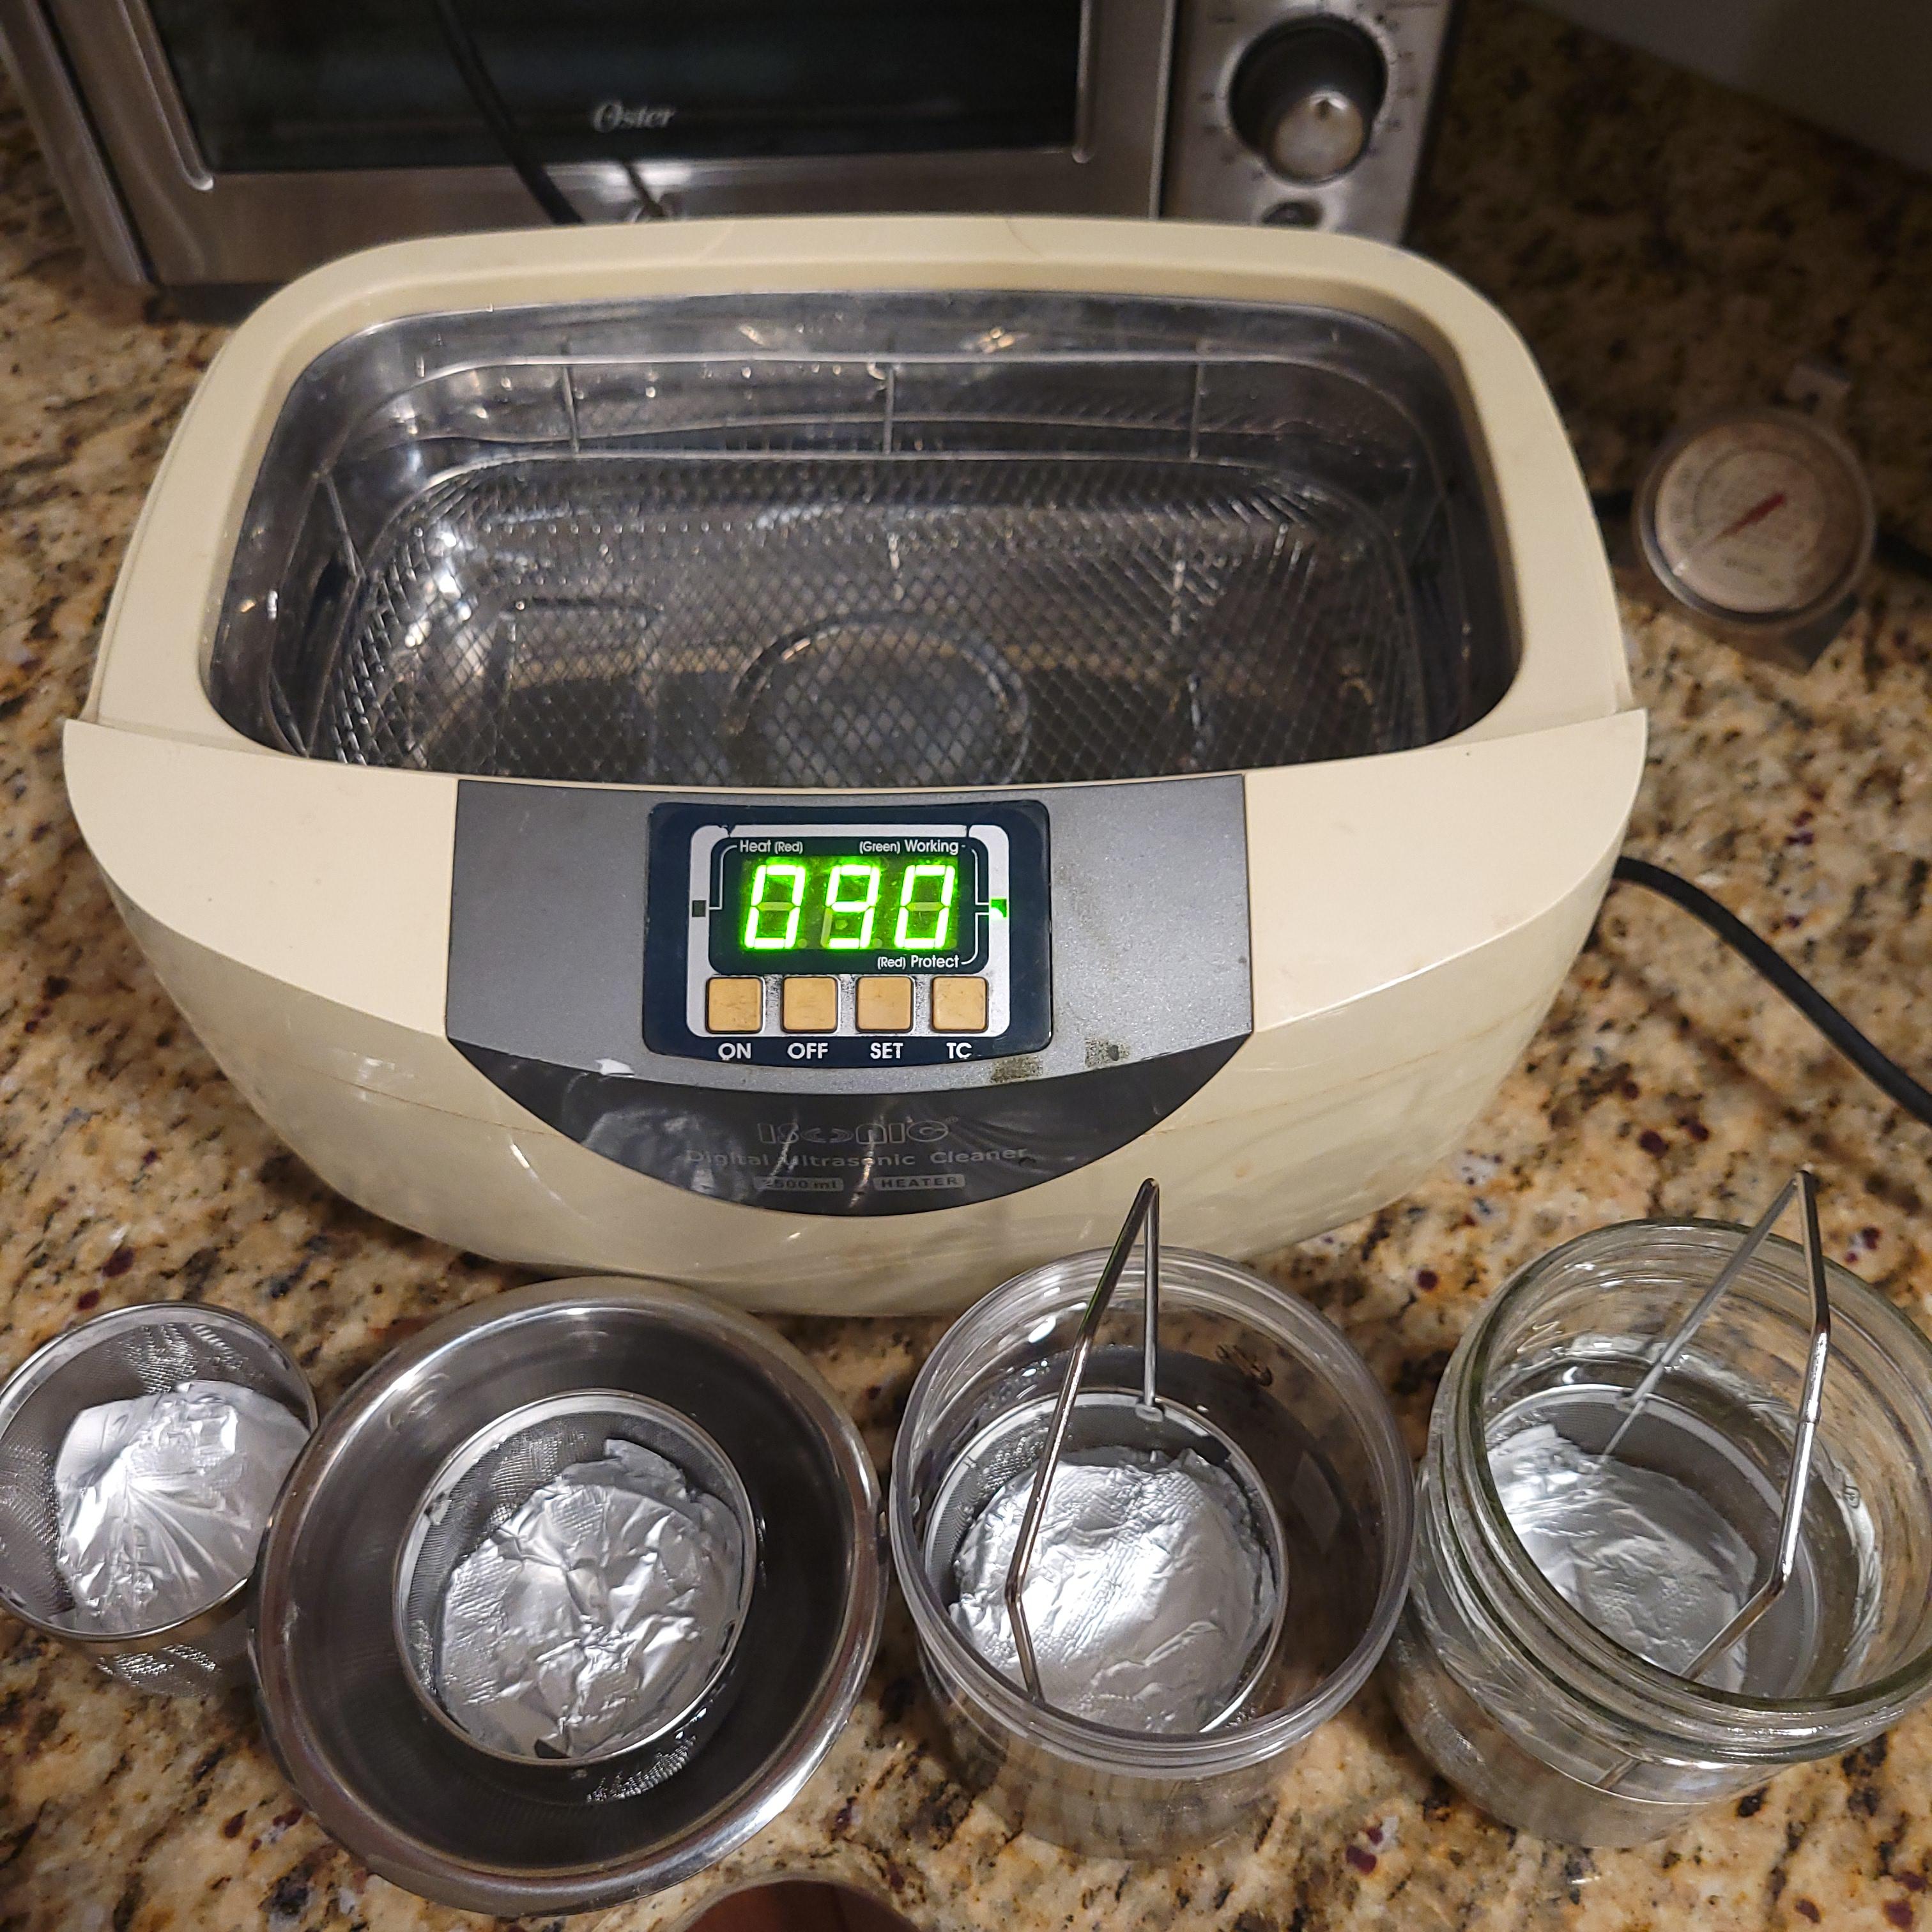 Can I used Salts Gone in my ultrasonic cleaner? At first I didnt even